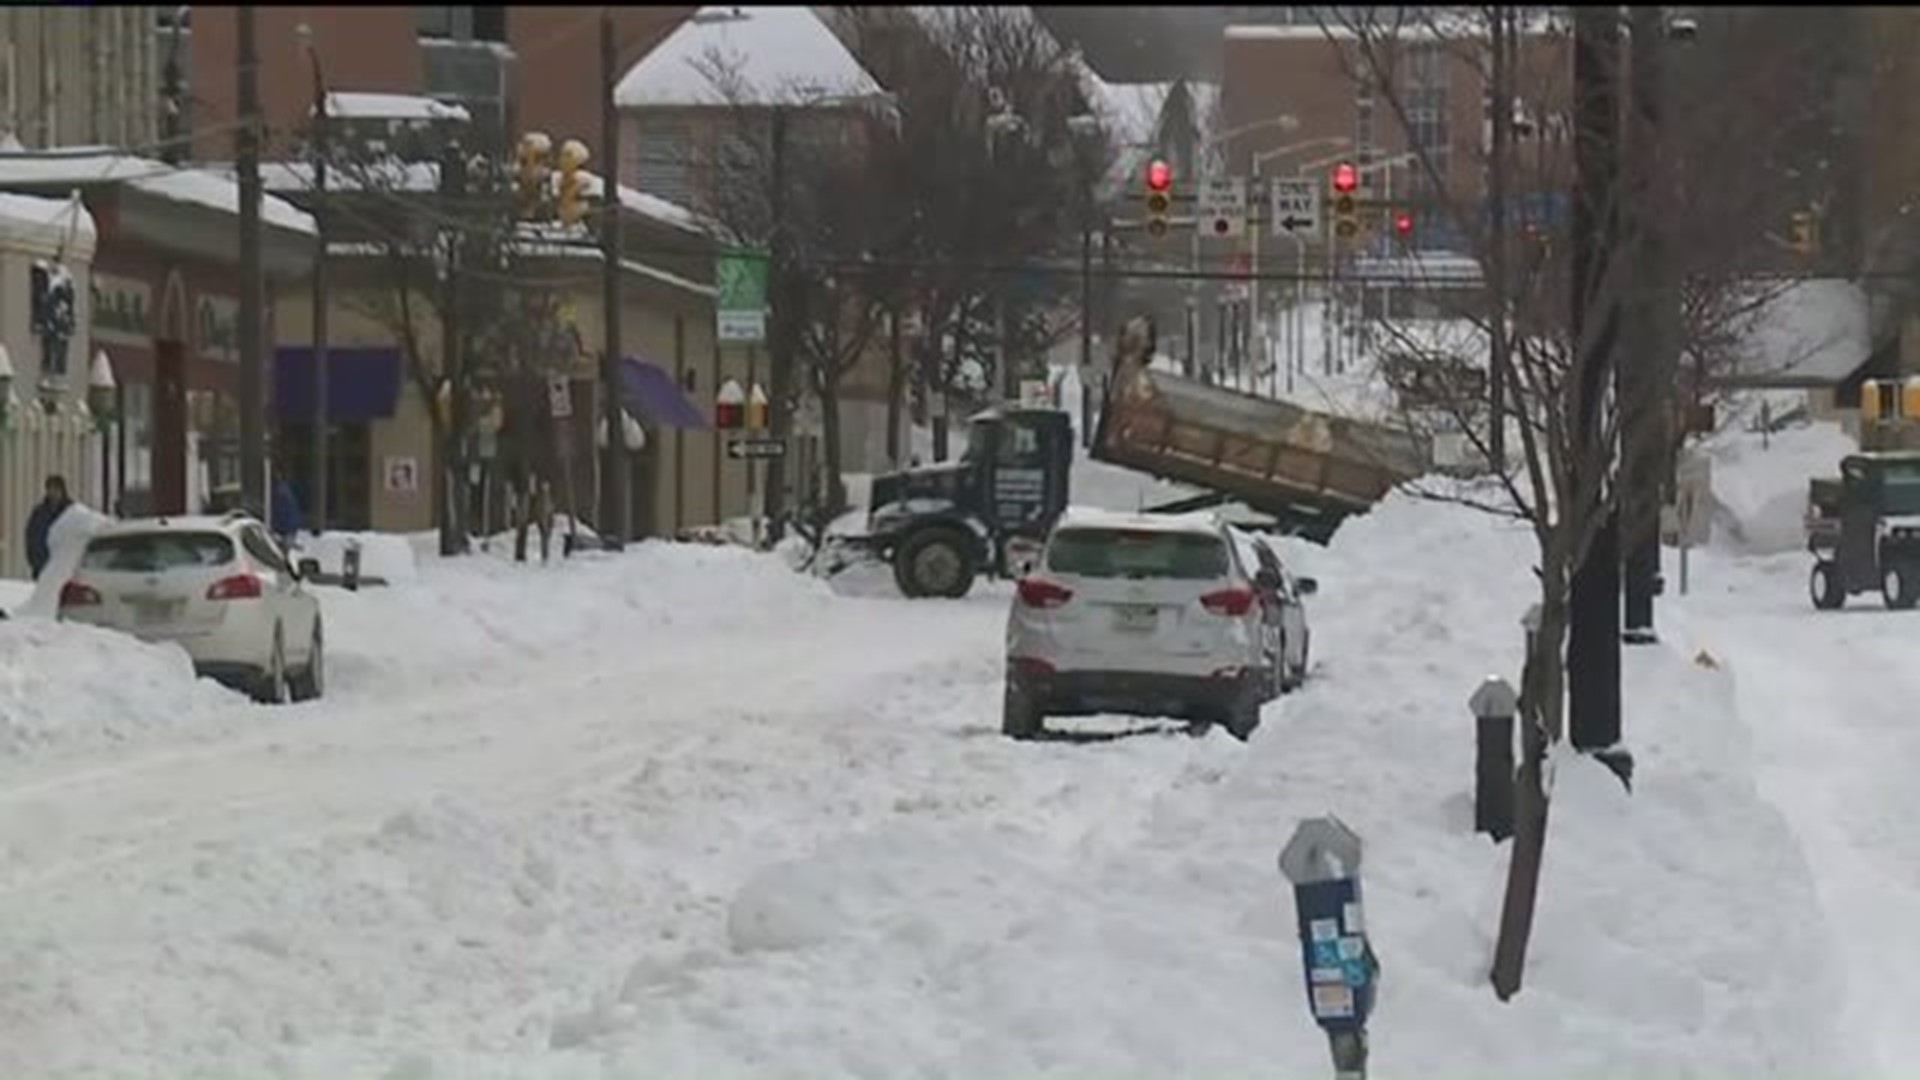 Scranton to Haul Snow from Downtown